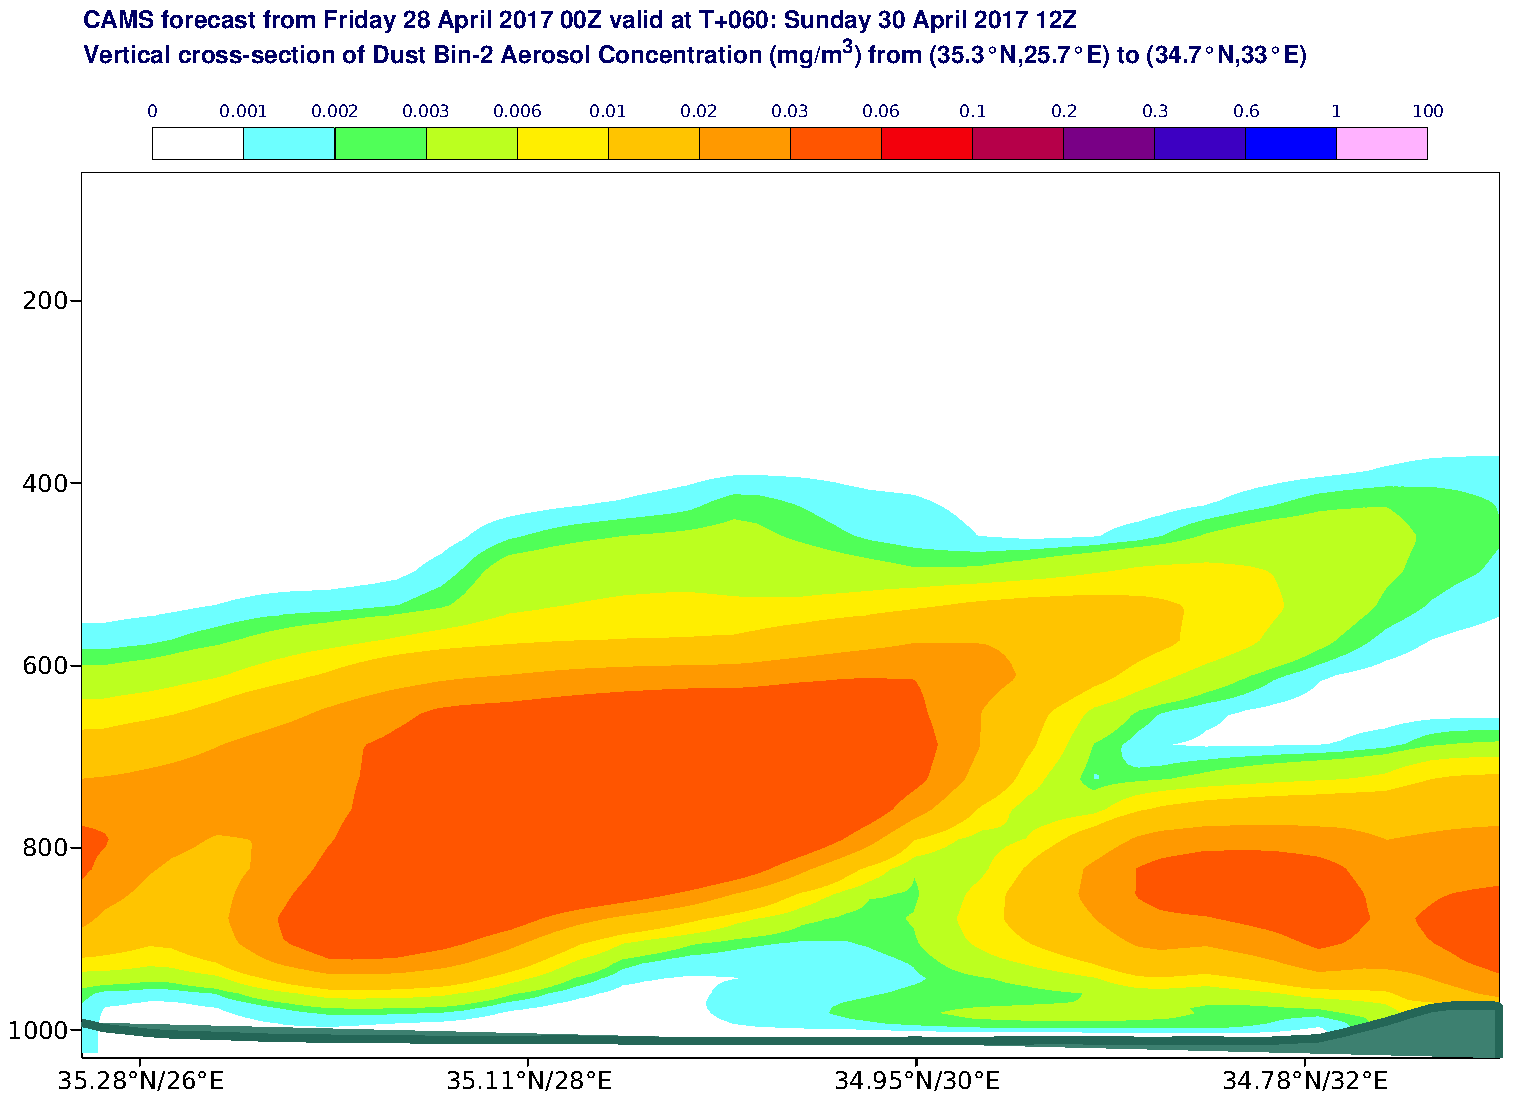 Vertical cross-section of Dust Bin-2 Aerosol Concentration (mg/m3) valid at T60 - 2017-04-30 12:00